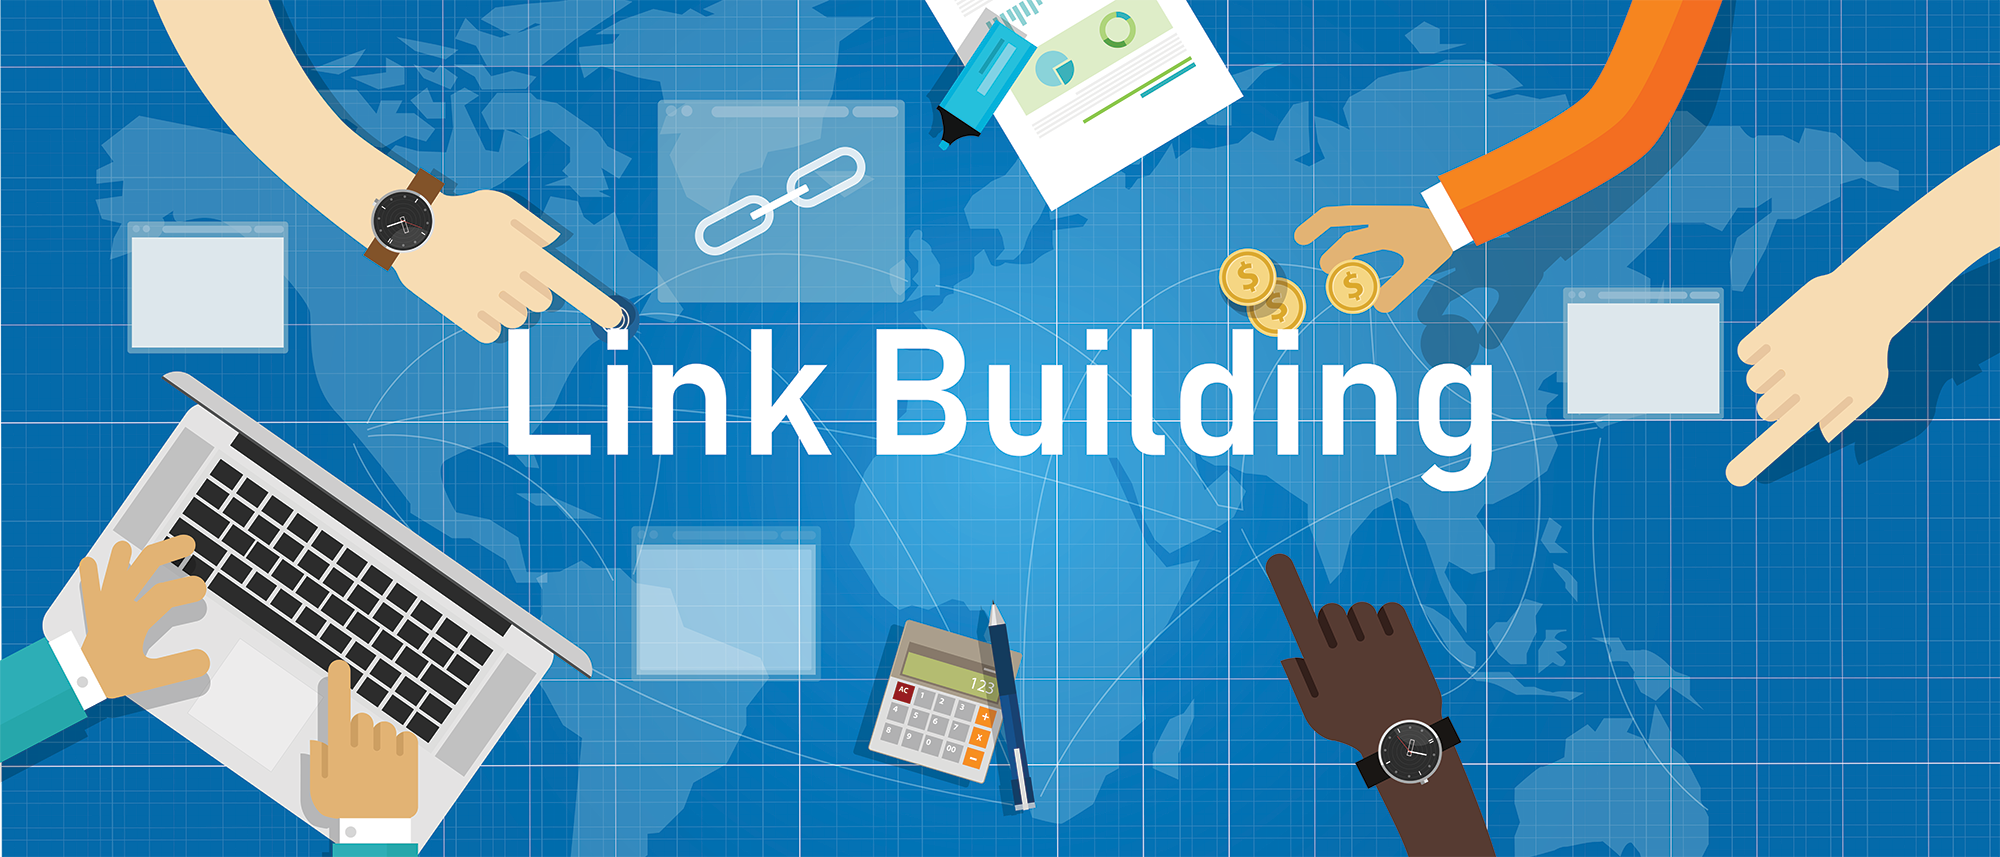 Human hands pointing to Link Building